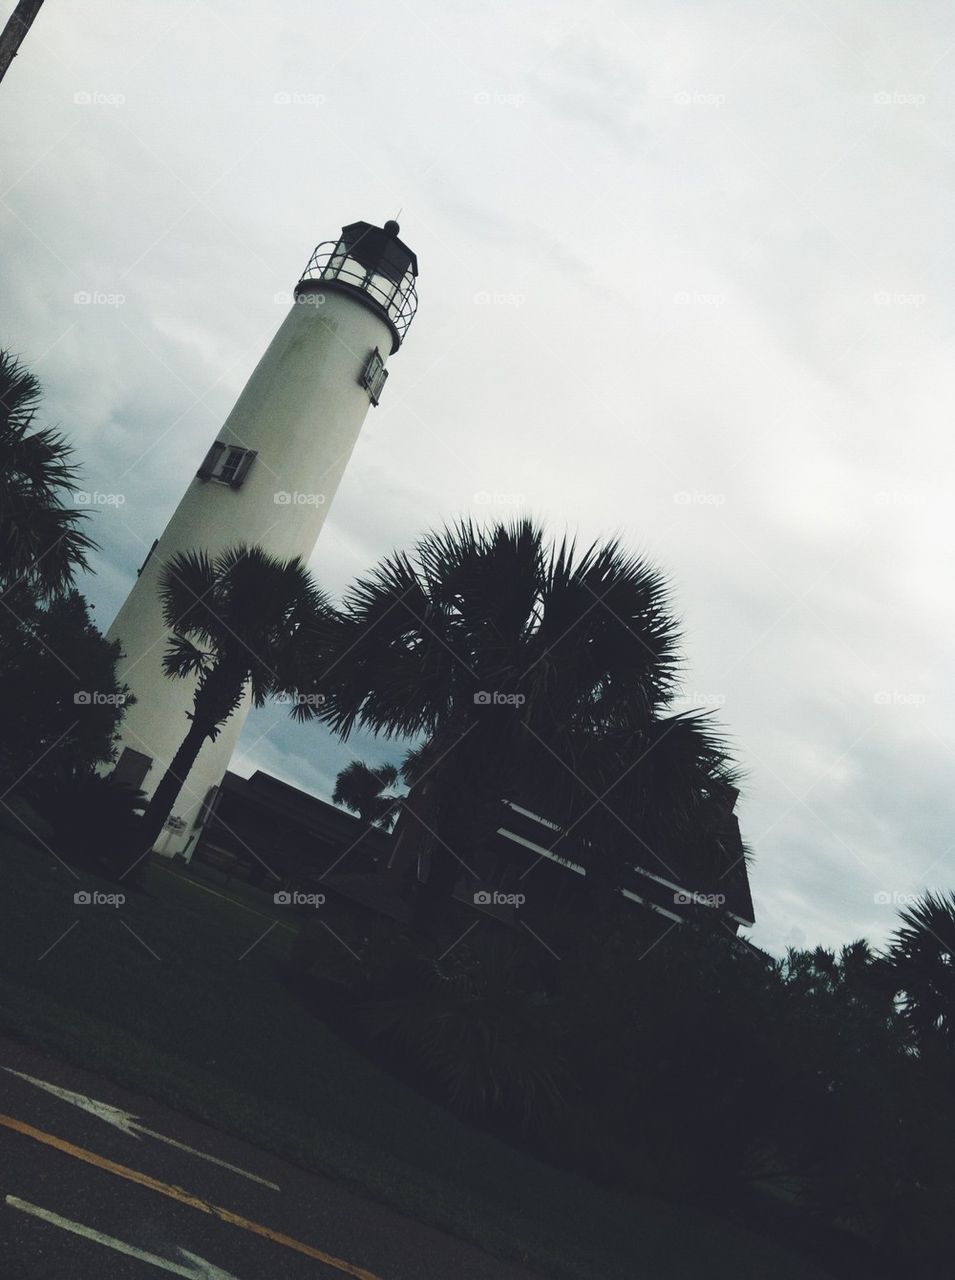 Lighthouse in the Palms 